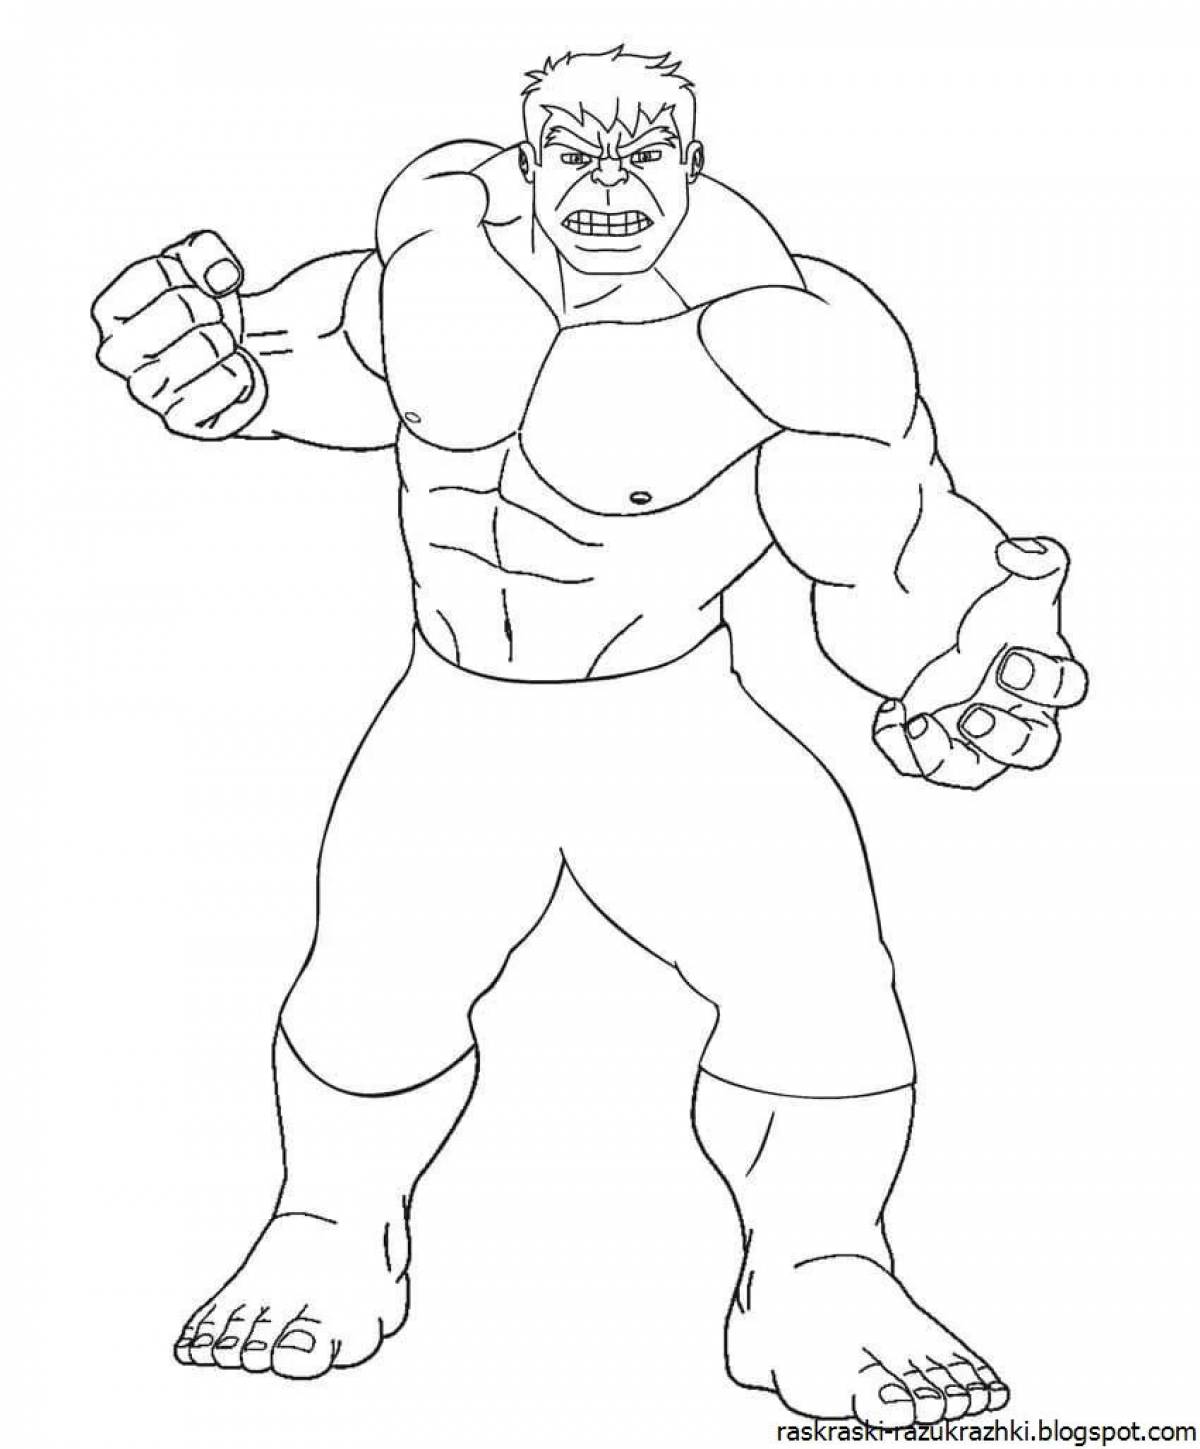 Coloring fairy hulk for boys